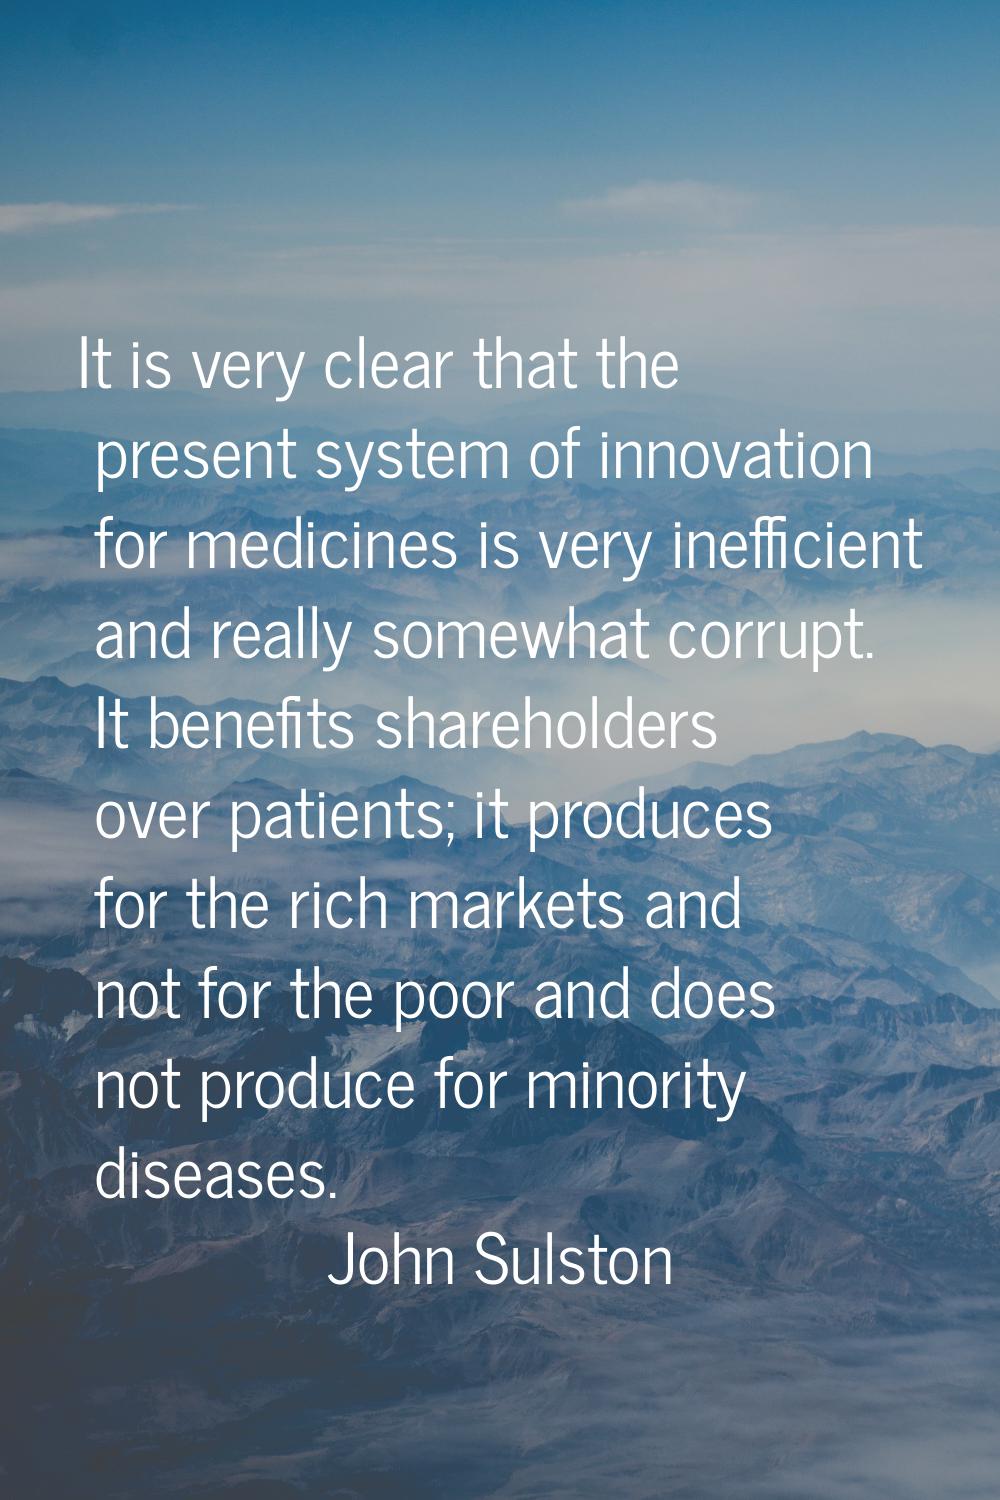 It is very clear that the present system of innovation for medicines is very inefficient and really